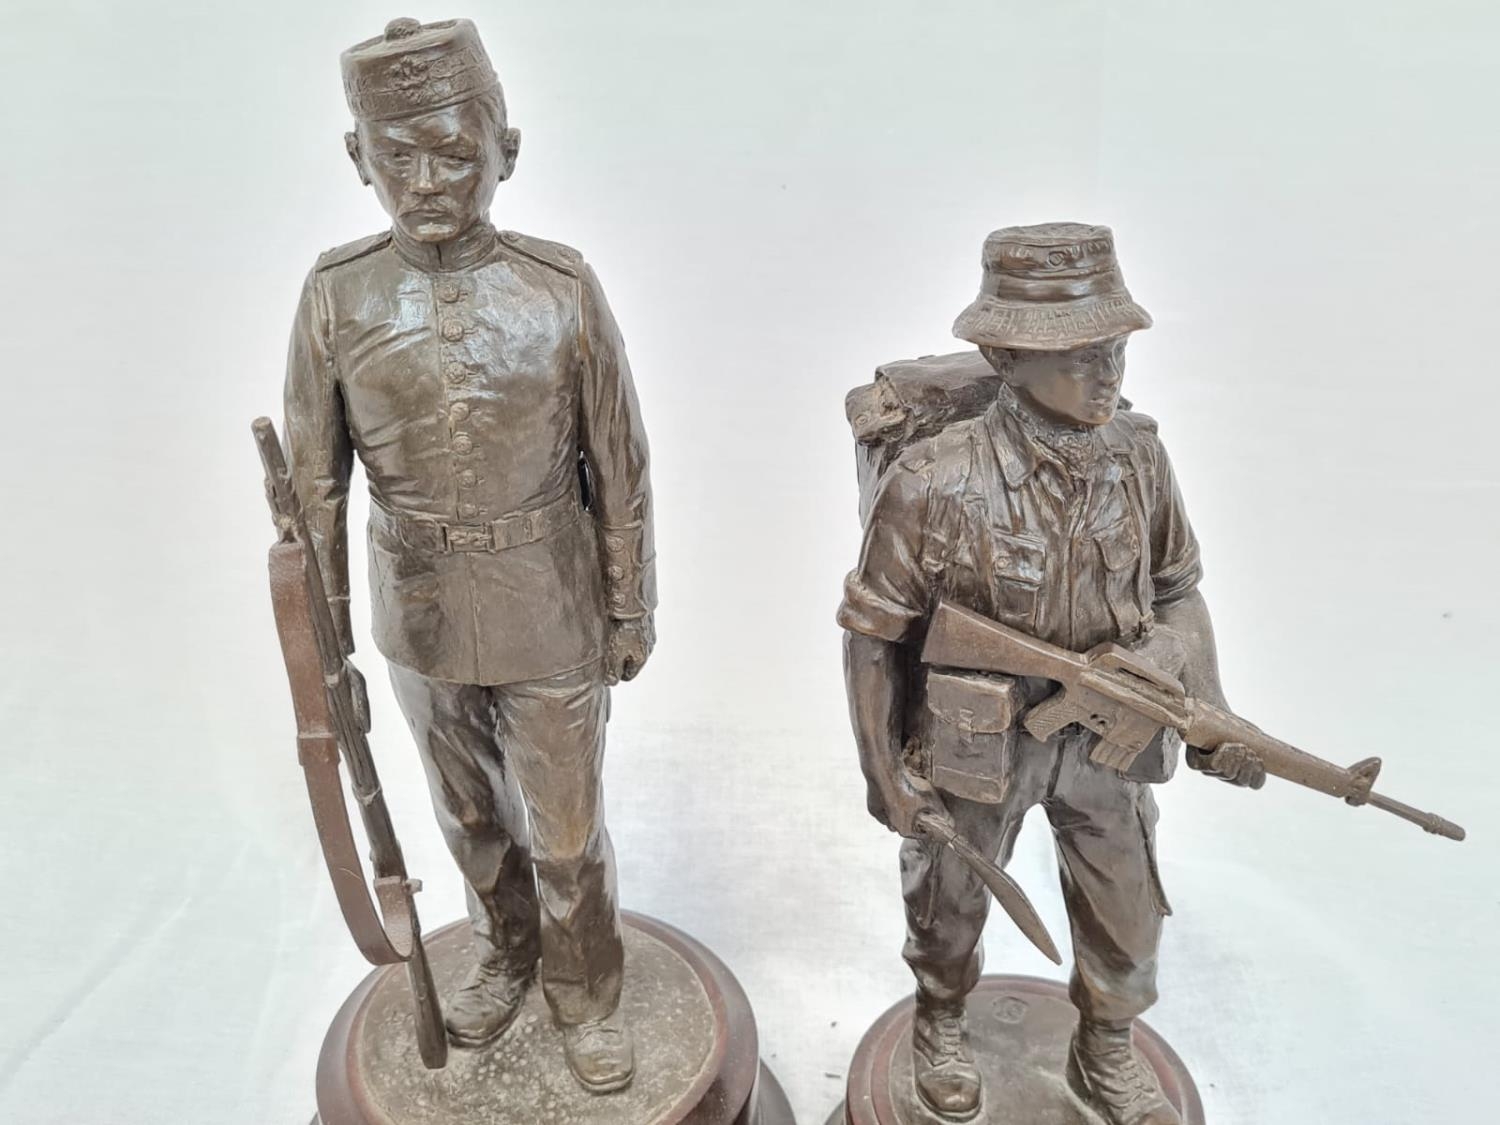 2 x cold cast bronze figures by Peter Hicks depicting Gurkha soldiers, one of the Victorian era - Image 2 of 5